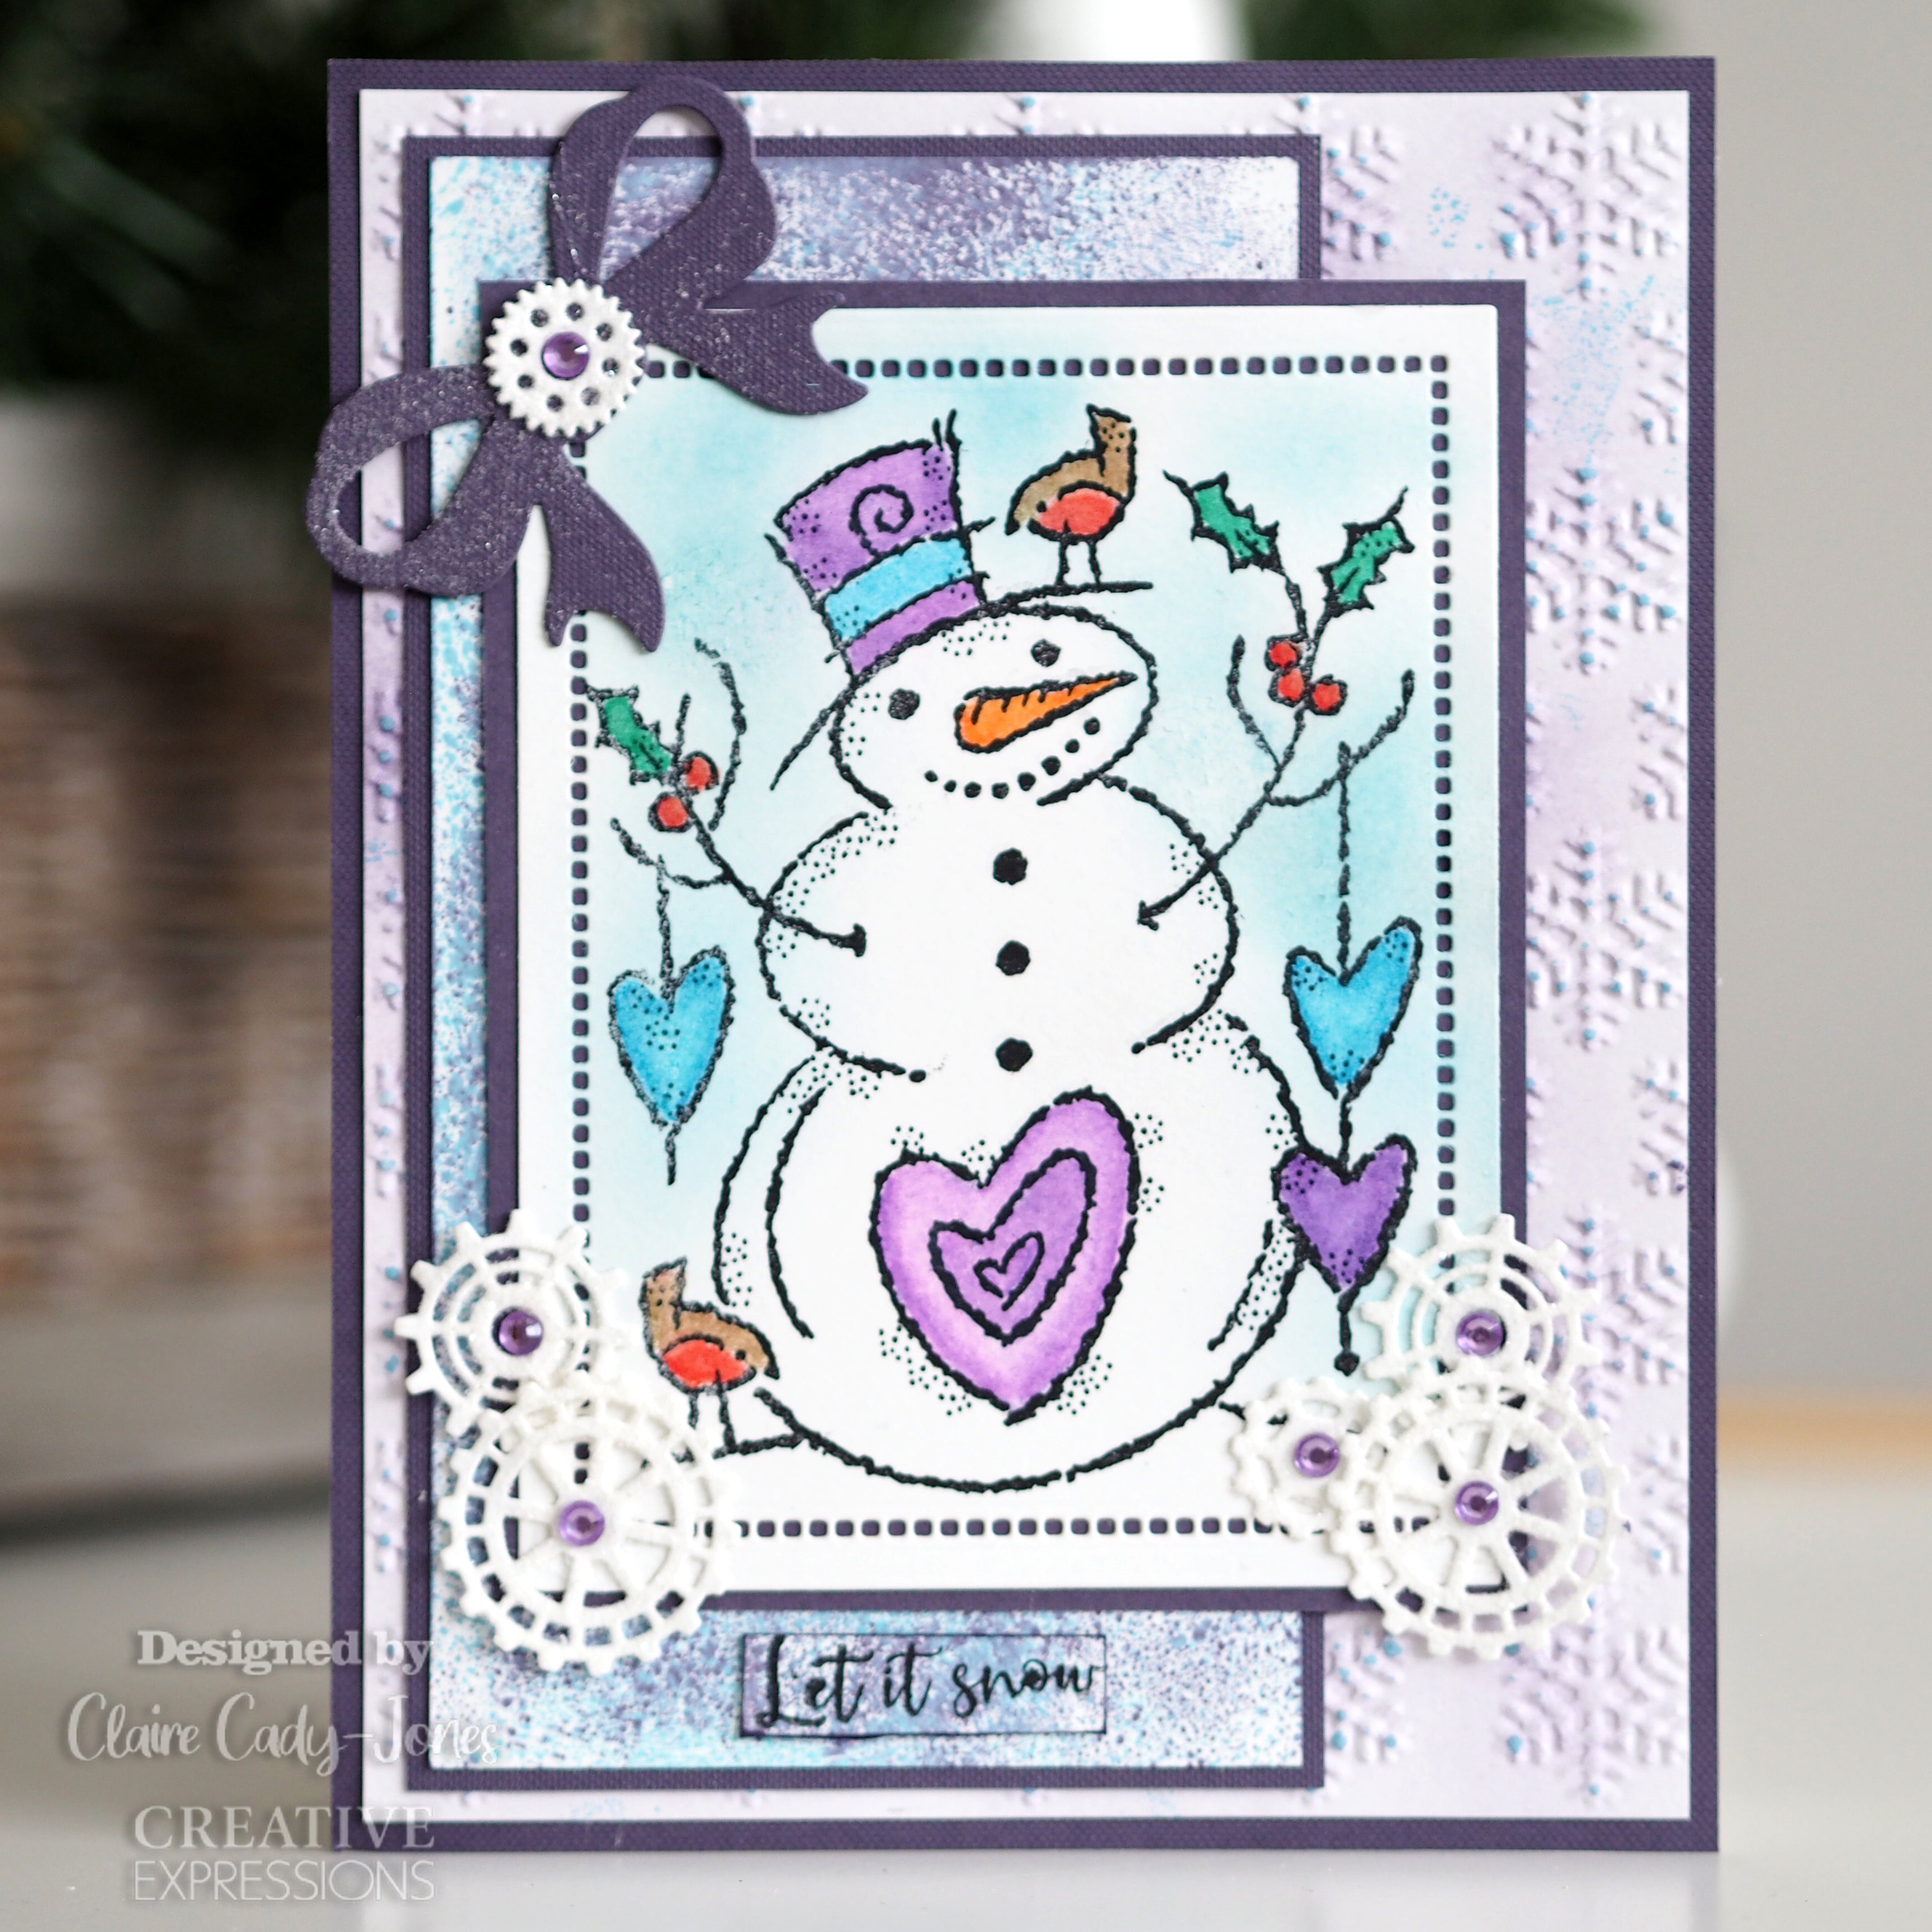 Woodware Clear Singles Loving Snowman 4 in x 6 in Stamp